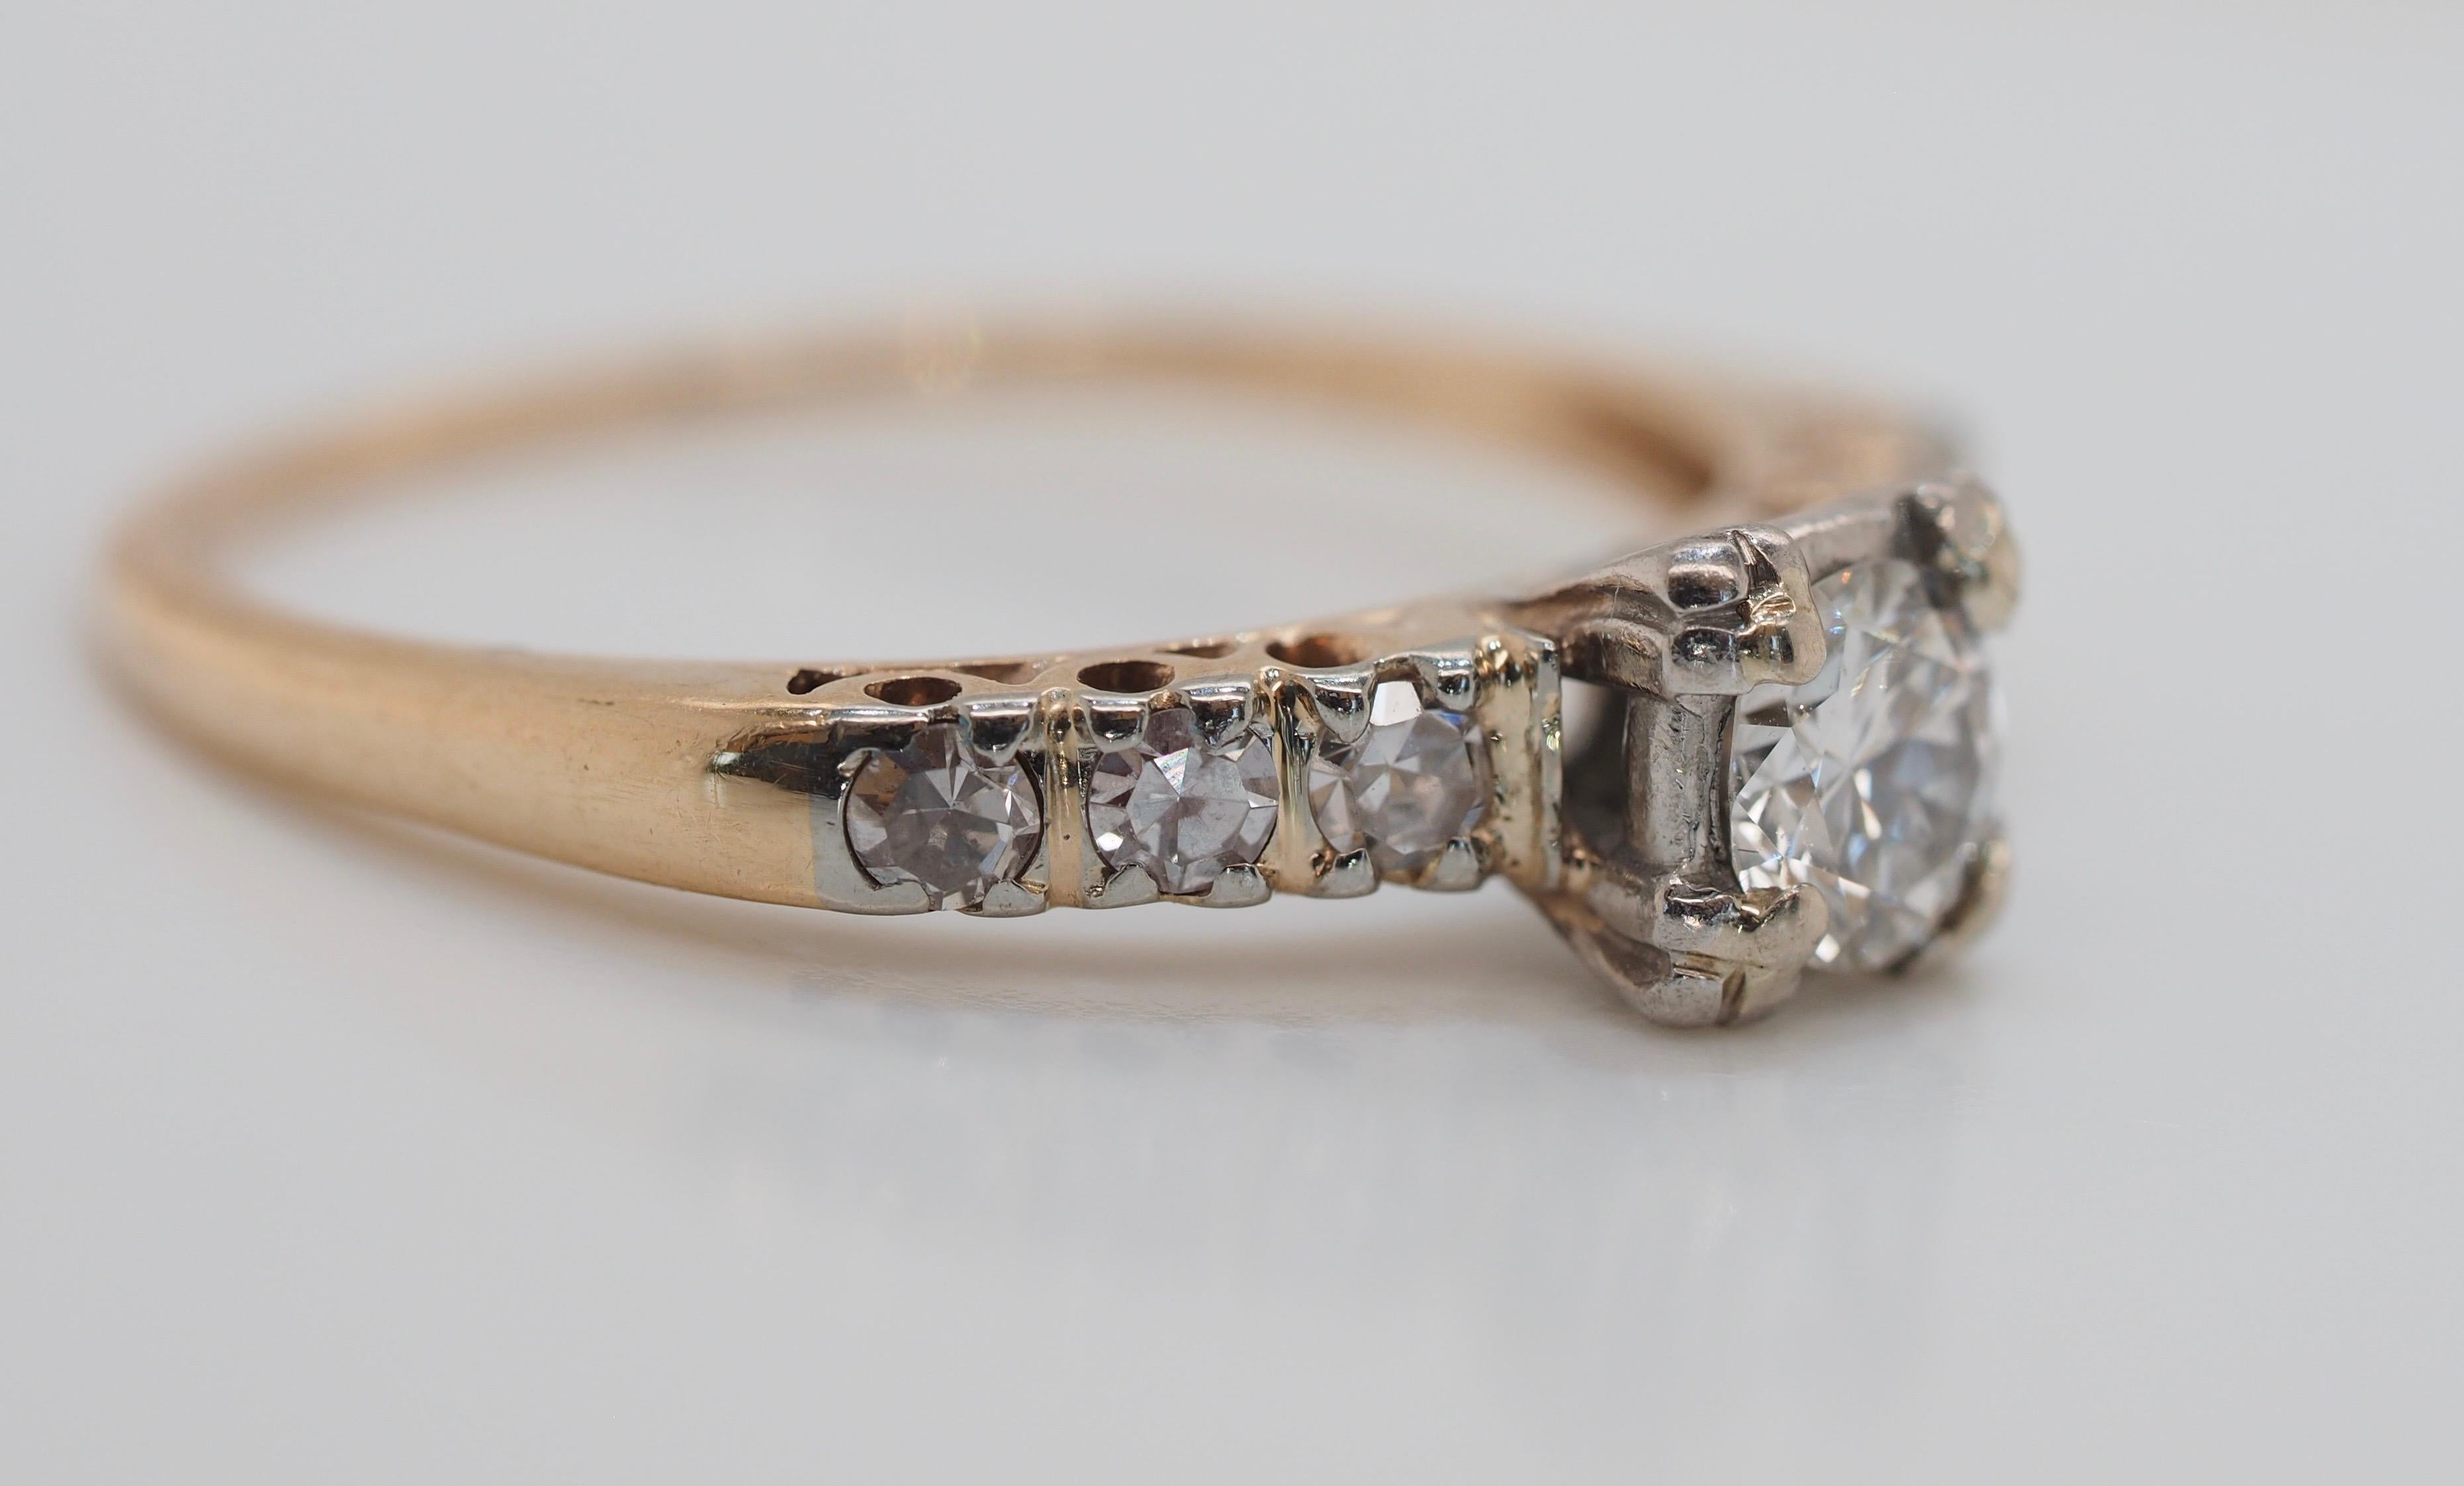 This ring is a perfect example of a classic Art Deco style featuring a stunning 1/3 carat brilliant cut center diamond set in fishtail prong settings, which were at the height of fashion during that era. This unique style made the center stone